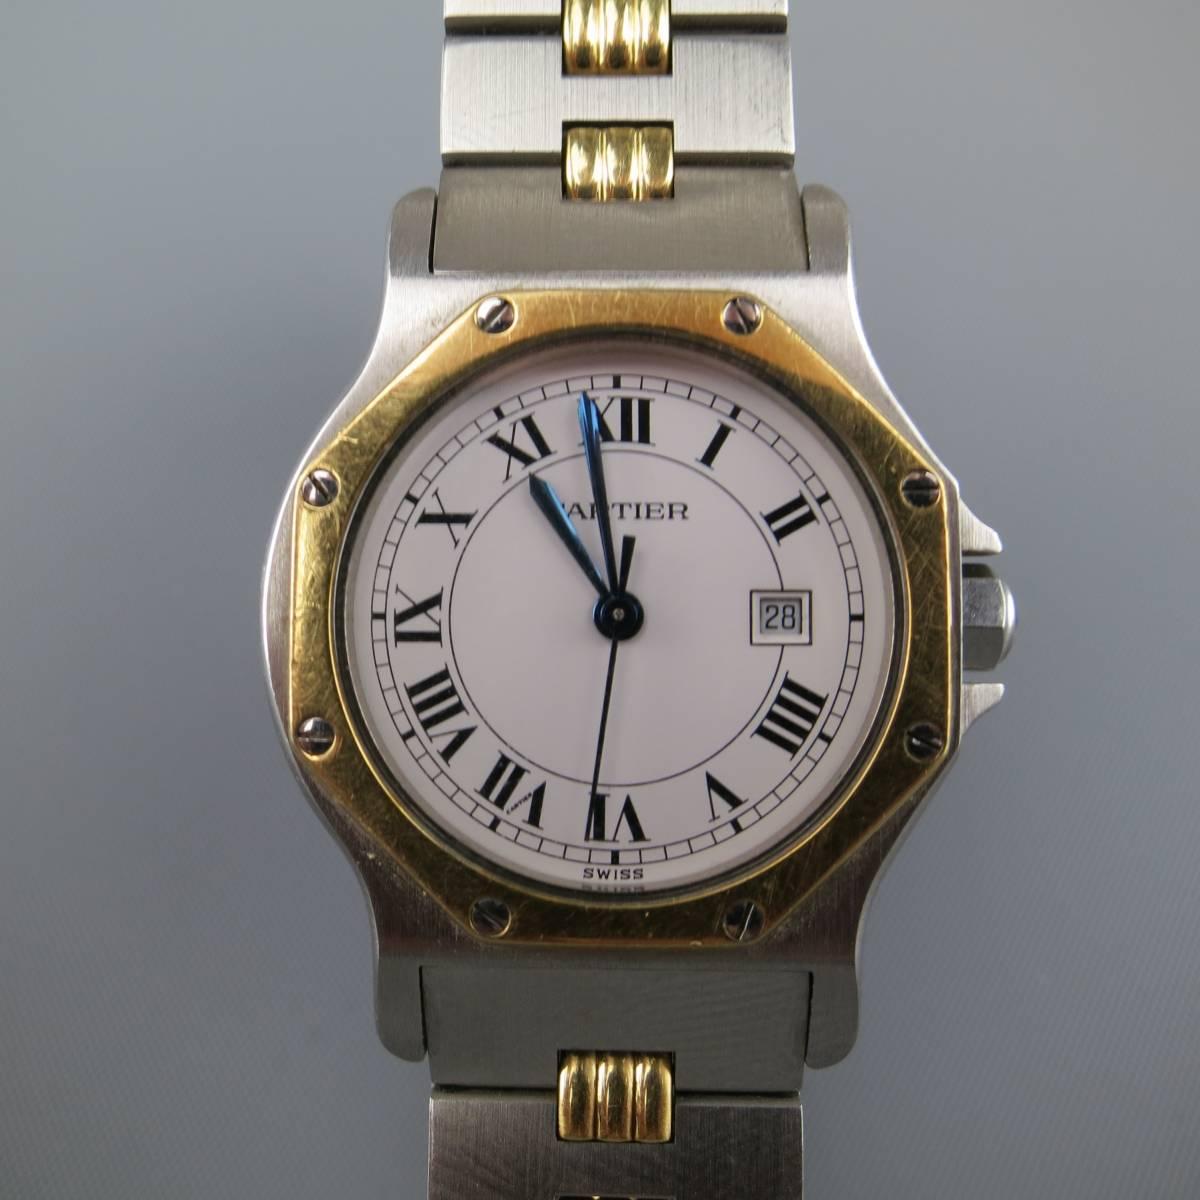 Vintage CARTIER Tank watch comes in silver ton stainless steel with 18k gold details and features an octagonal face with screw details and clasp closure. Minor wear. Swiss Made.
 
Retails at $5,800.00

Good Pre-Owned Condition.
Marked: 296642497
